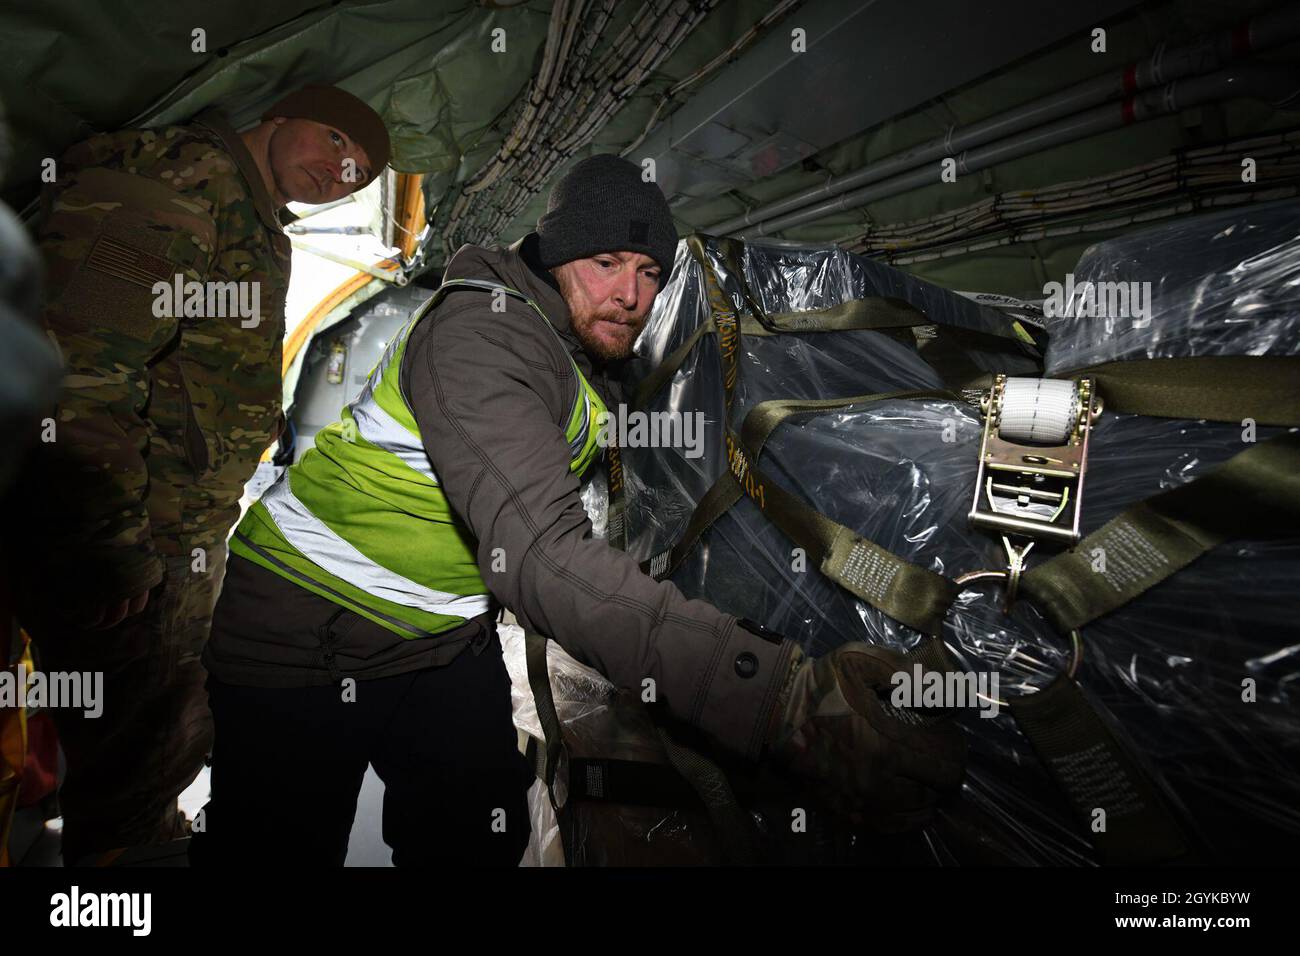 Christopher Reeve, 727th Air Mobility Squadron ramp operator, loads cargo onto a KC-135 Stratotanker during an annual cargo evaluation check ride at RAF Mildenhall, England, Jan. 16, 2020. The cargo check ride involves an inspection inside and outside the aircraft marking sure all loads are balanced and secured properly. (U.S. Air Force photo by Senior Airman Alexandria Lee) Stock Photo